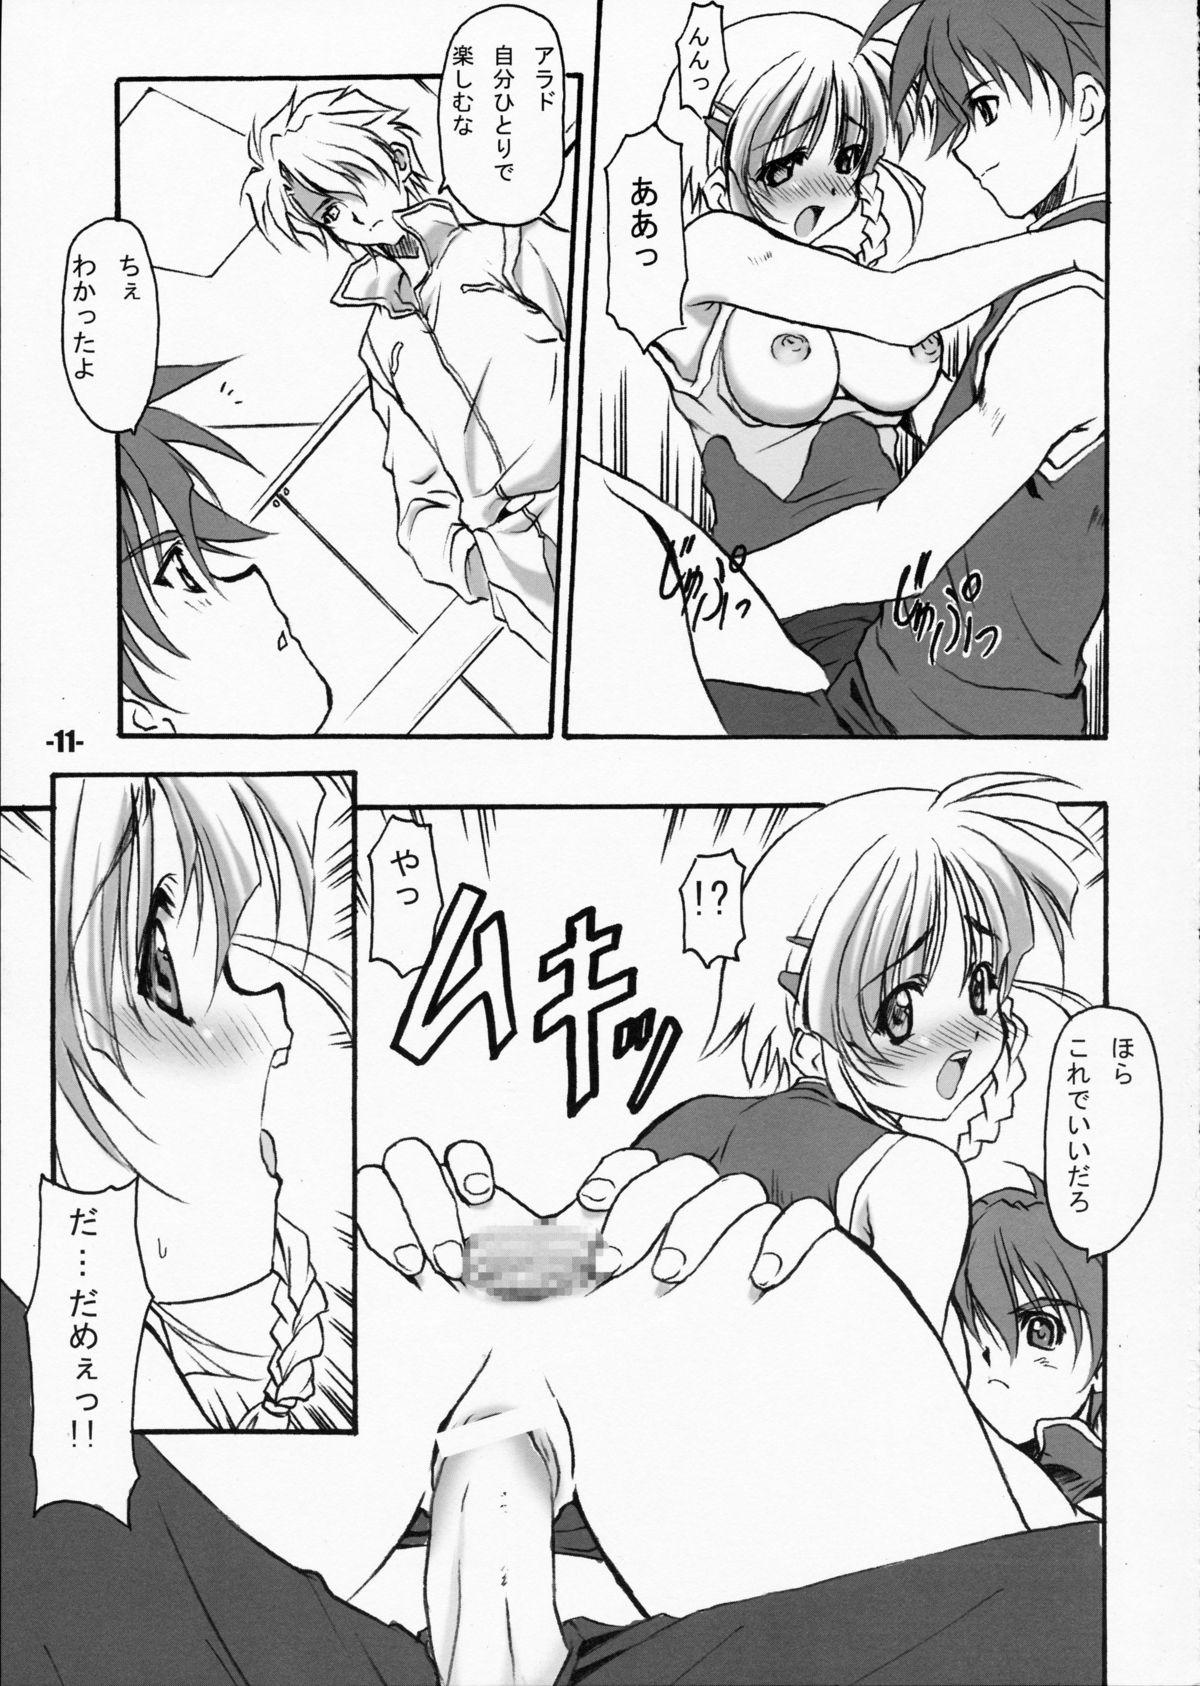 Pool EXtra stage vol.17 Z.O - Super robot wars Women Sucking Dick - Page 11